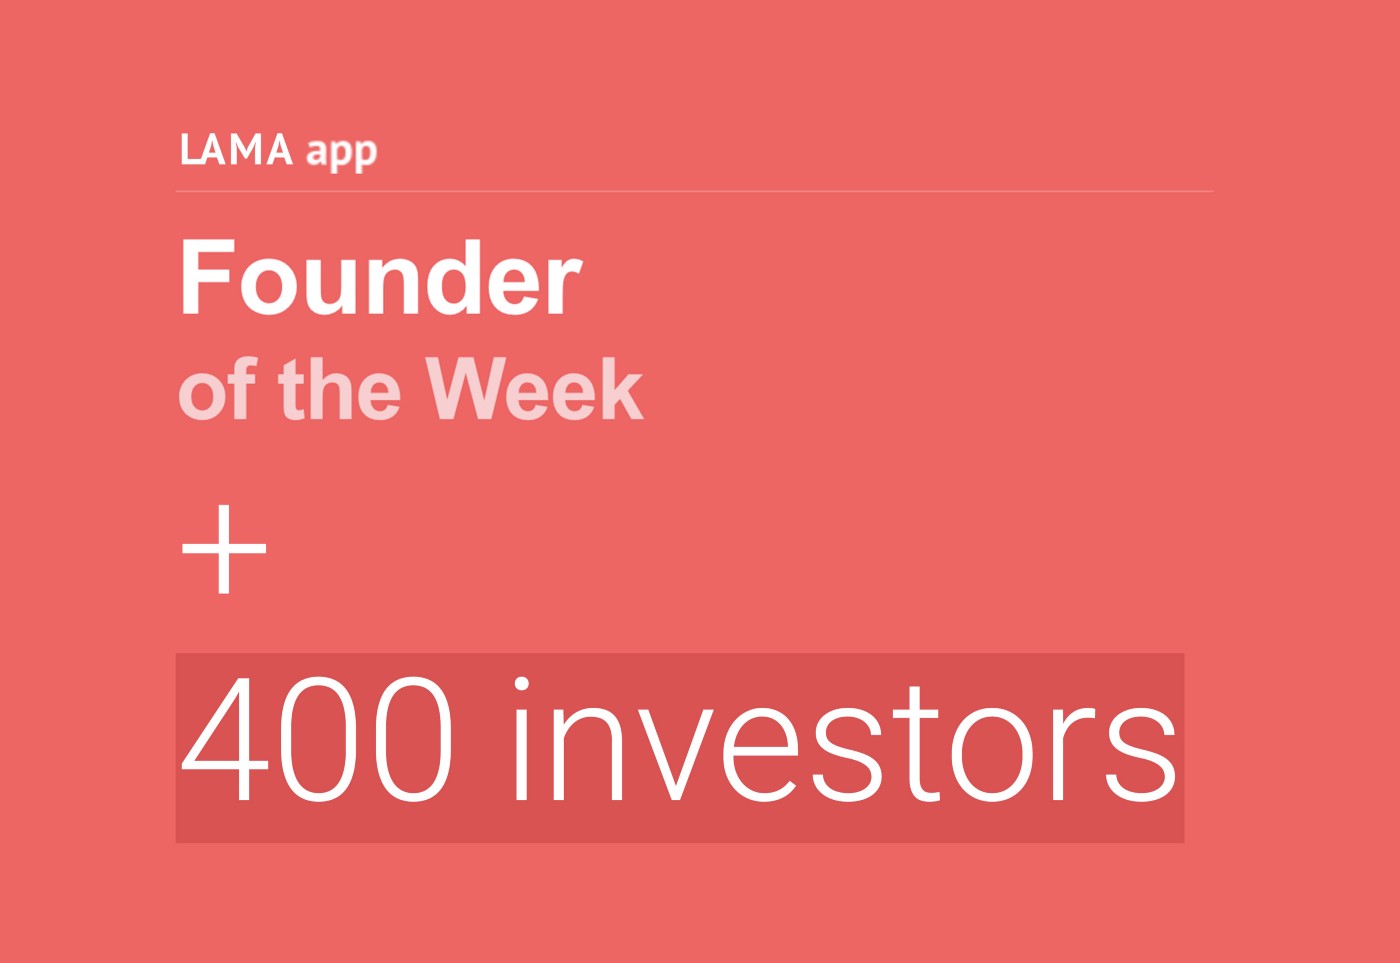 LAMA Founder of the Week